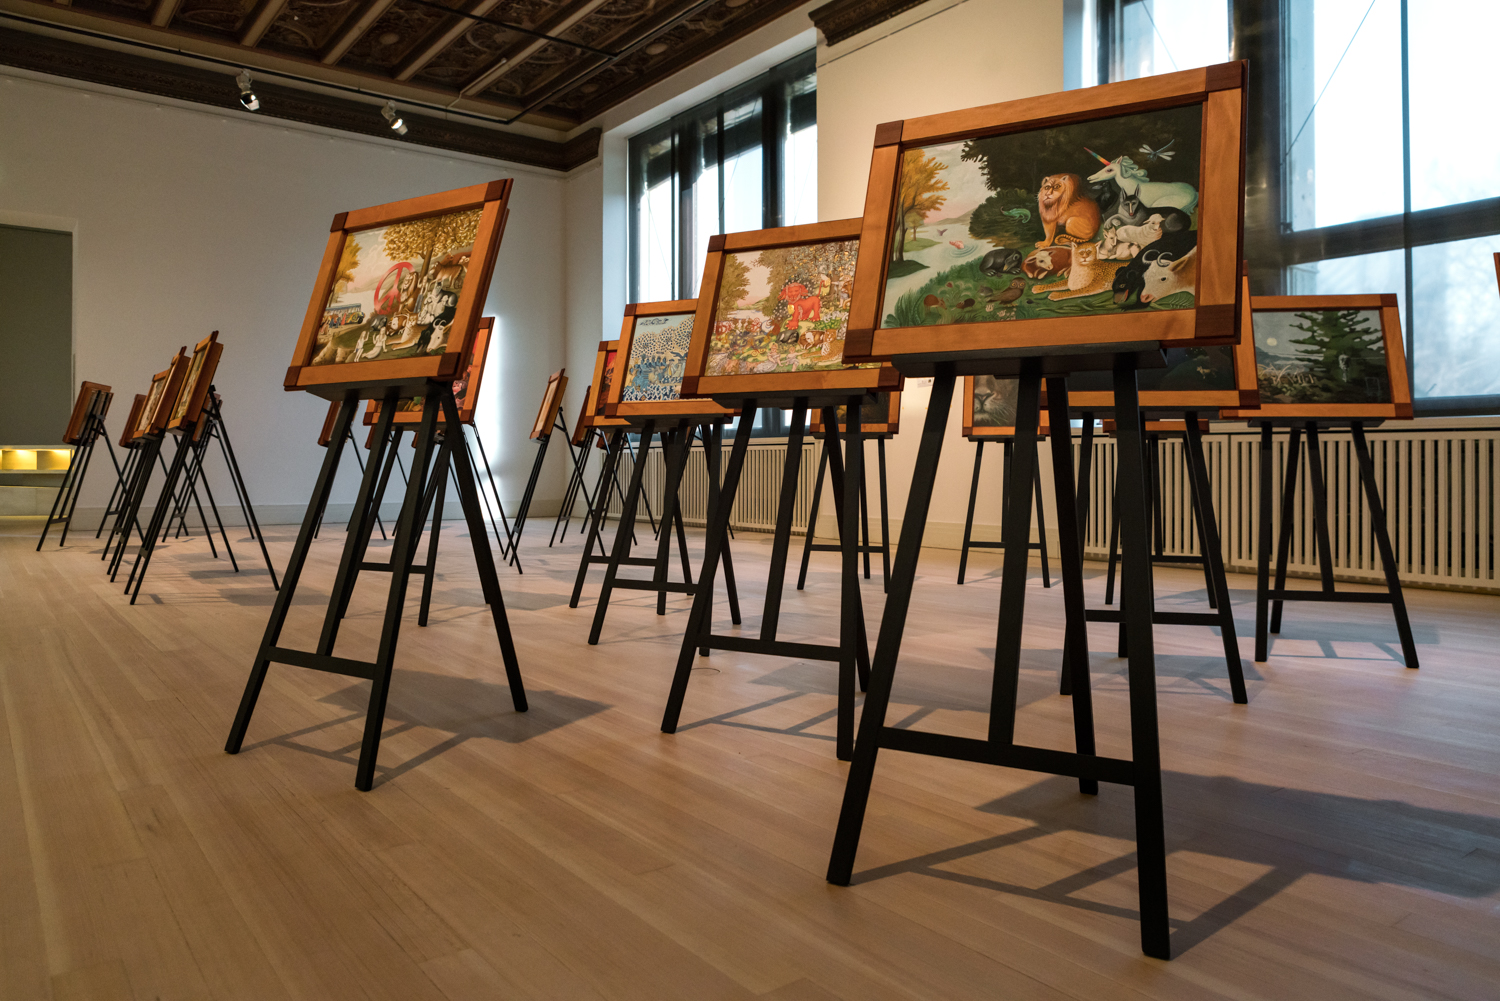 Paintings on easels in a gallery with wood floors and large windows; art appears colorful and varied.